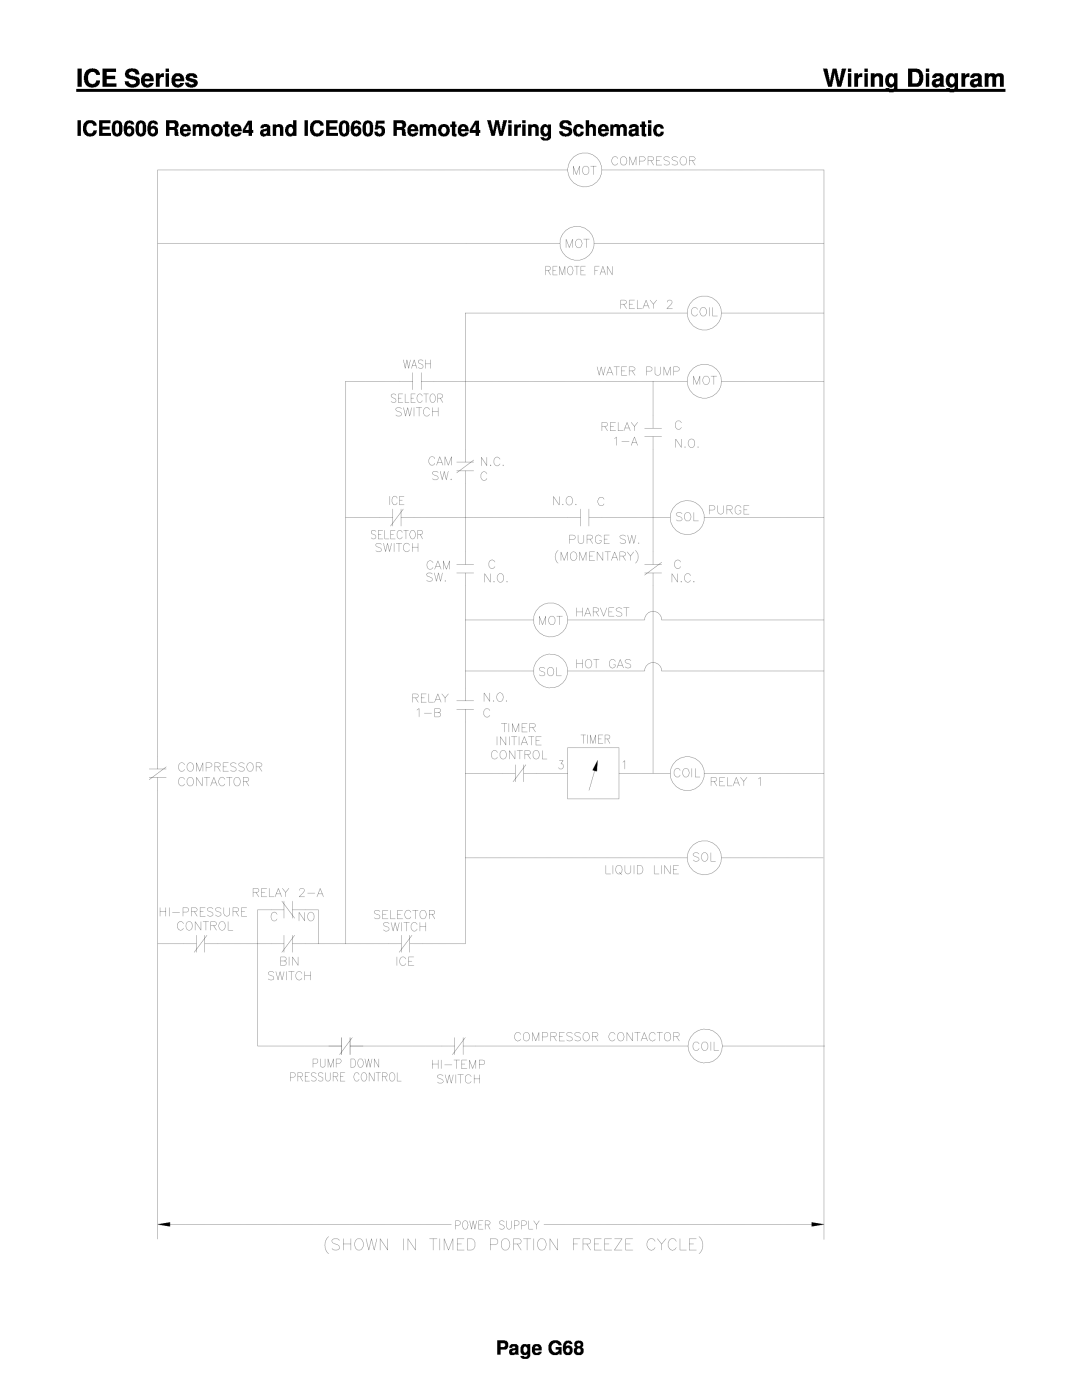 Ice-O-Matic ICE0250 Series ICE0606 Remote4 and ICE0605 Remote4 Wiring Schematic, ICE Series, Wiring Diagram, Page G68 